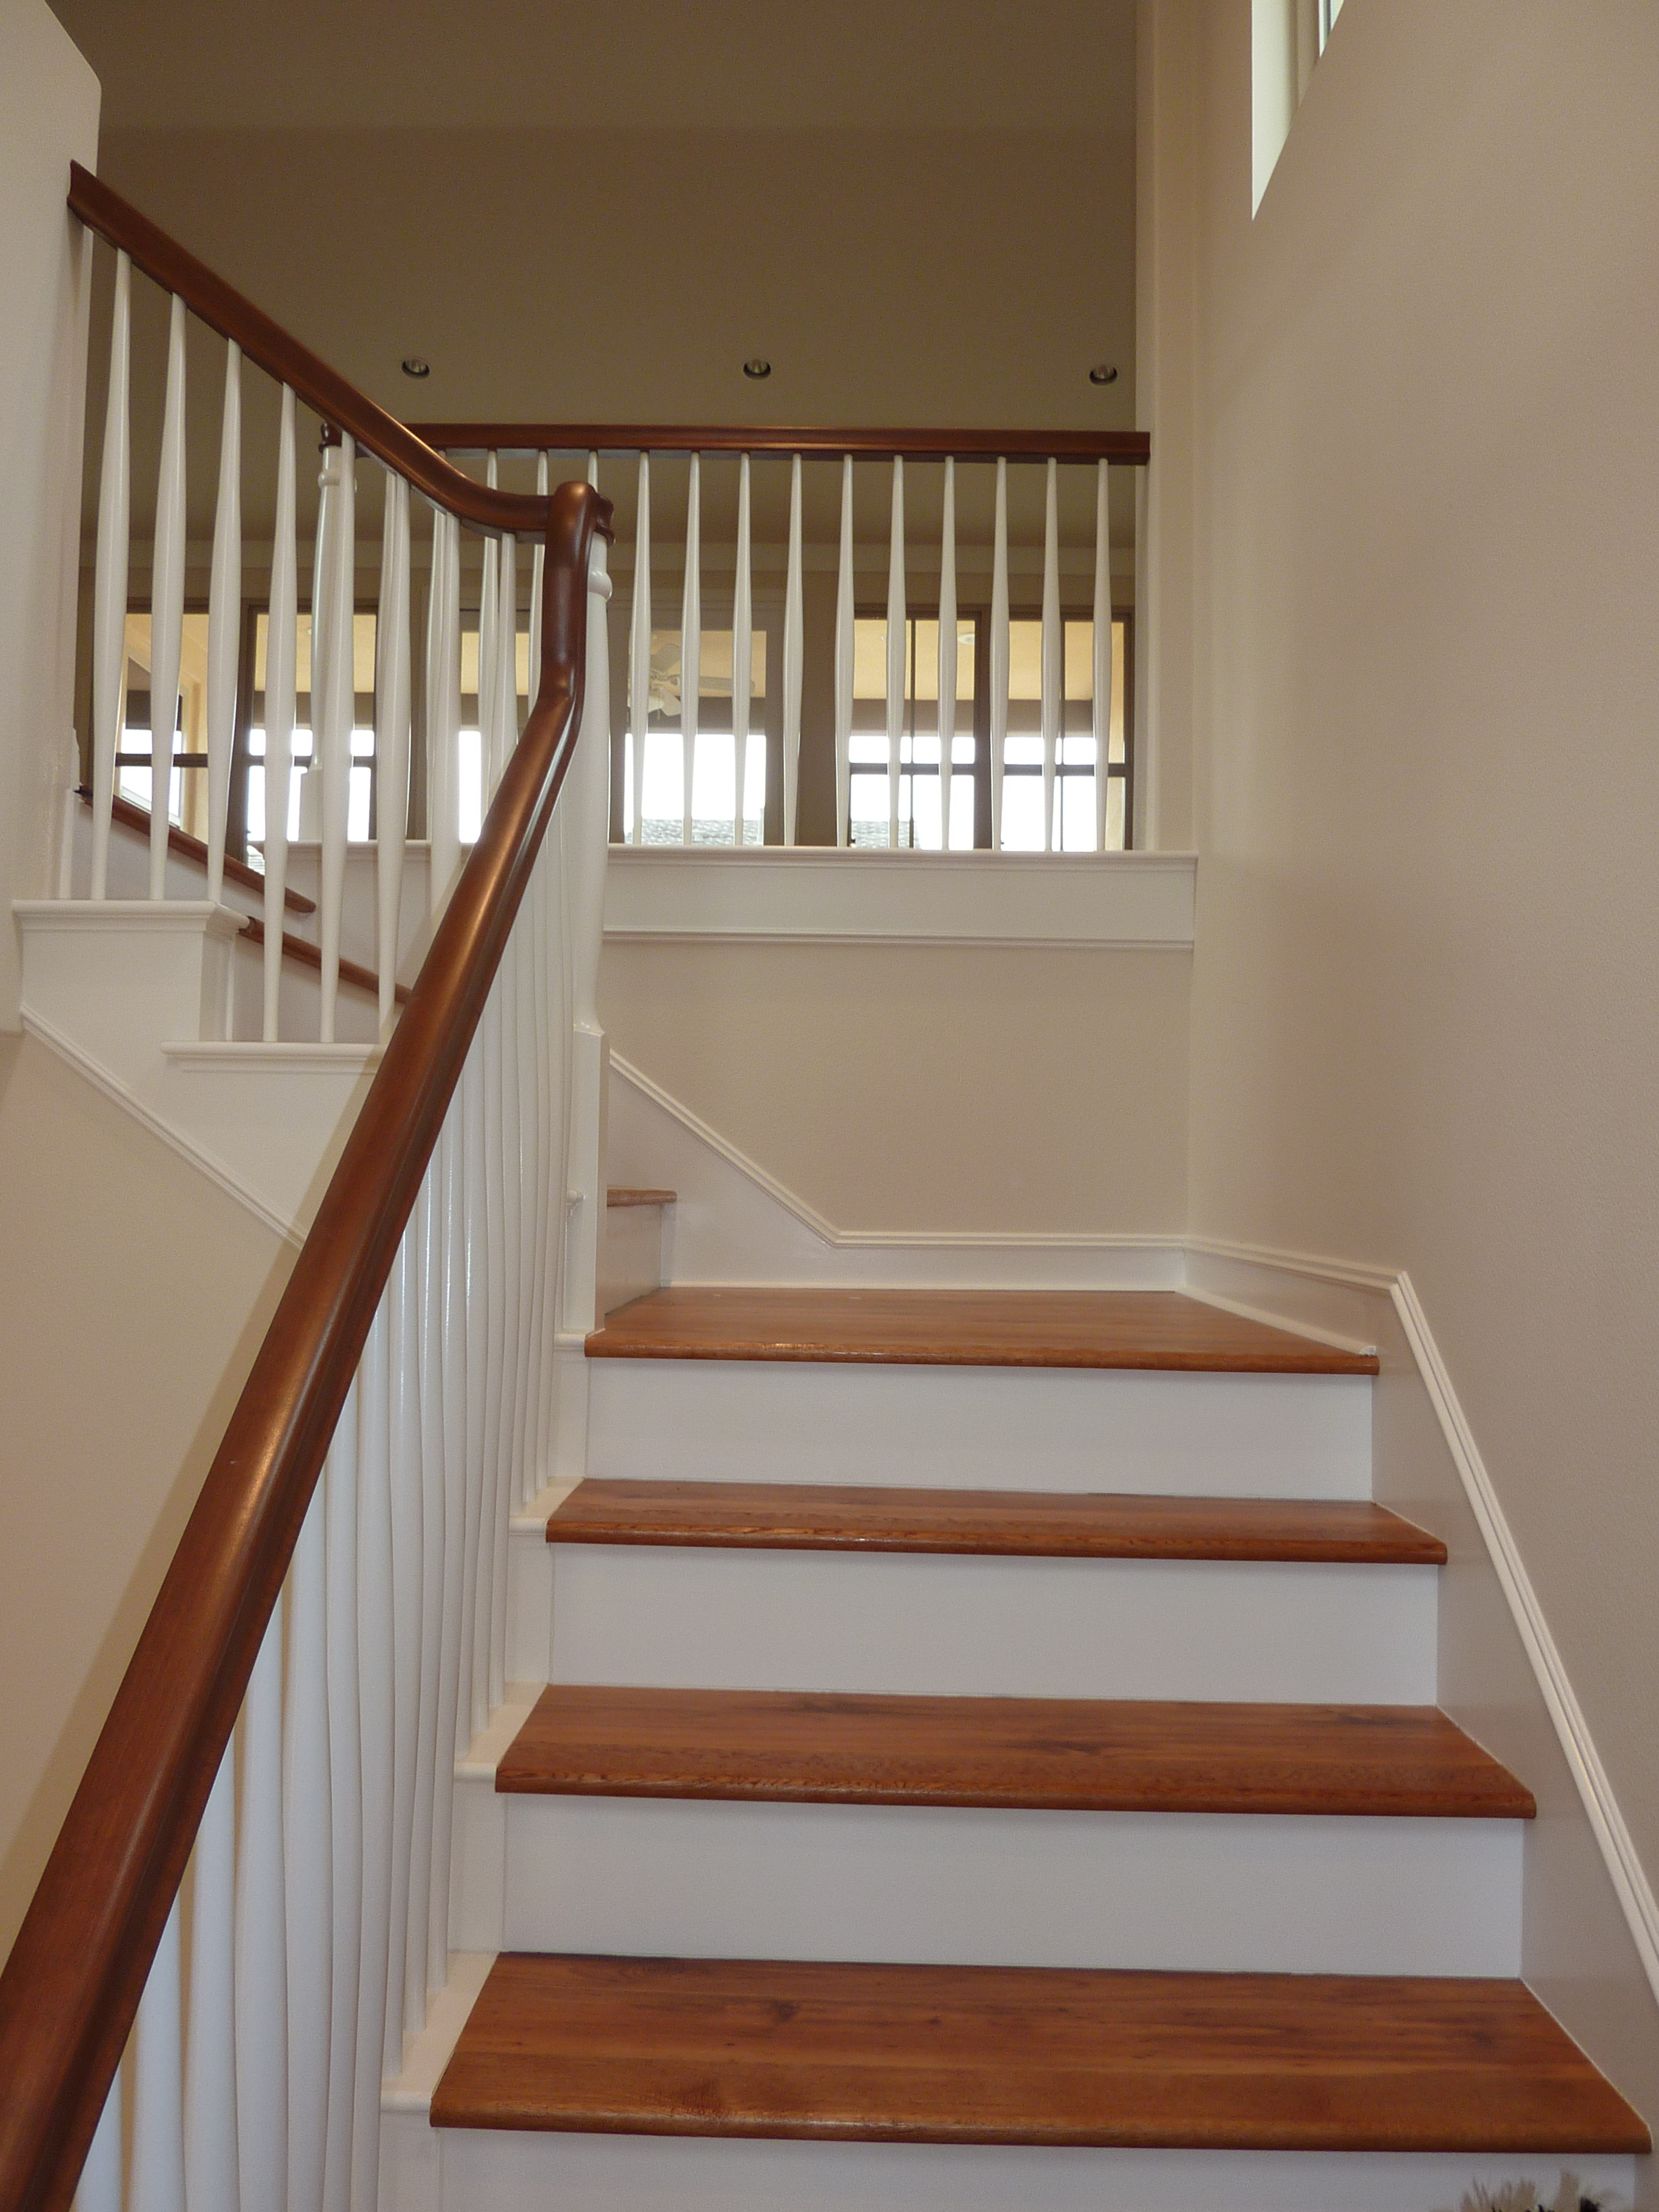 Stairs | Practically Renovating